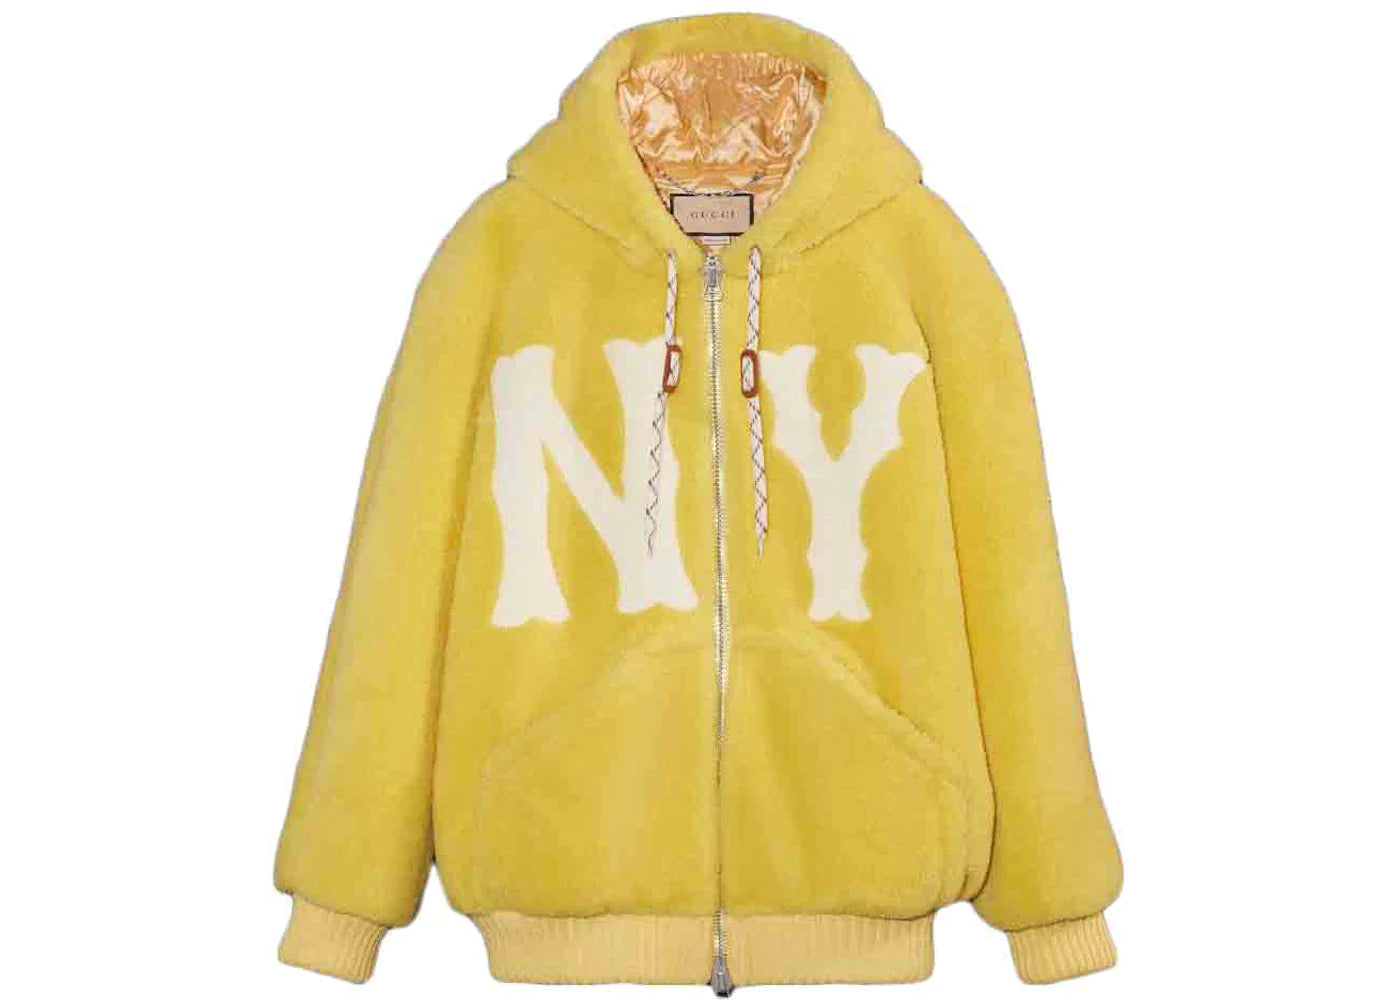 Gucci x MLB 2022 Shearling Jacket with Yankees Patch Light Yellow